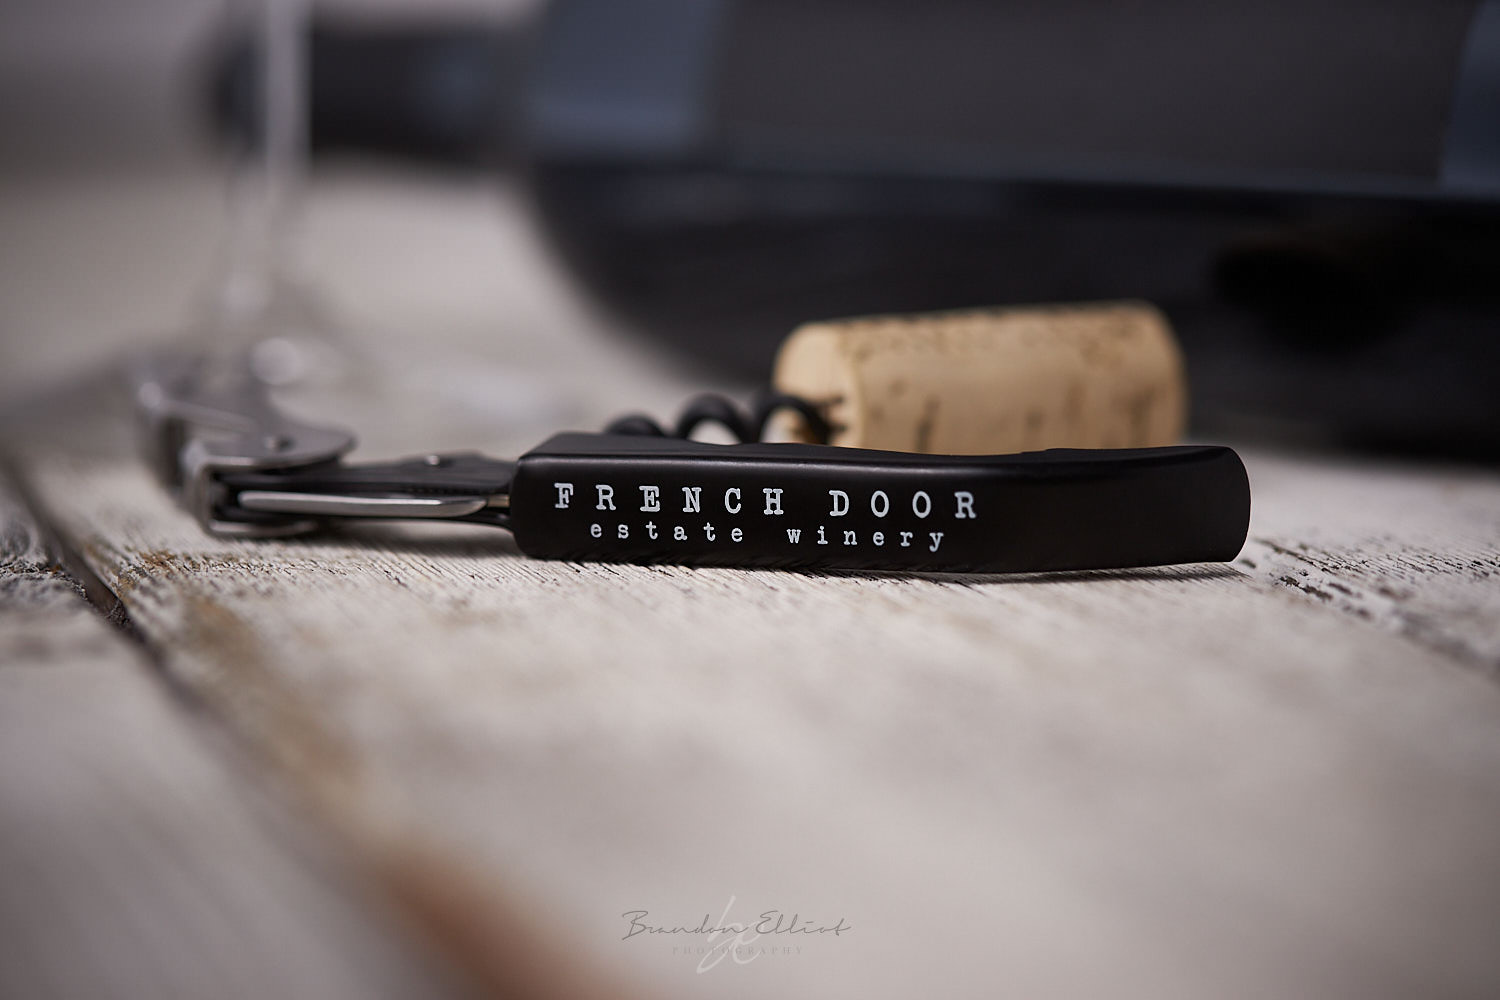 Corkscrew of French Door winery with cork